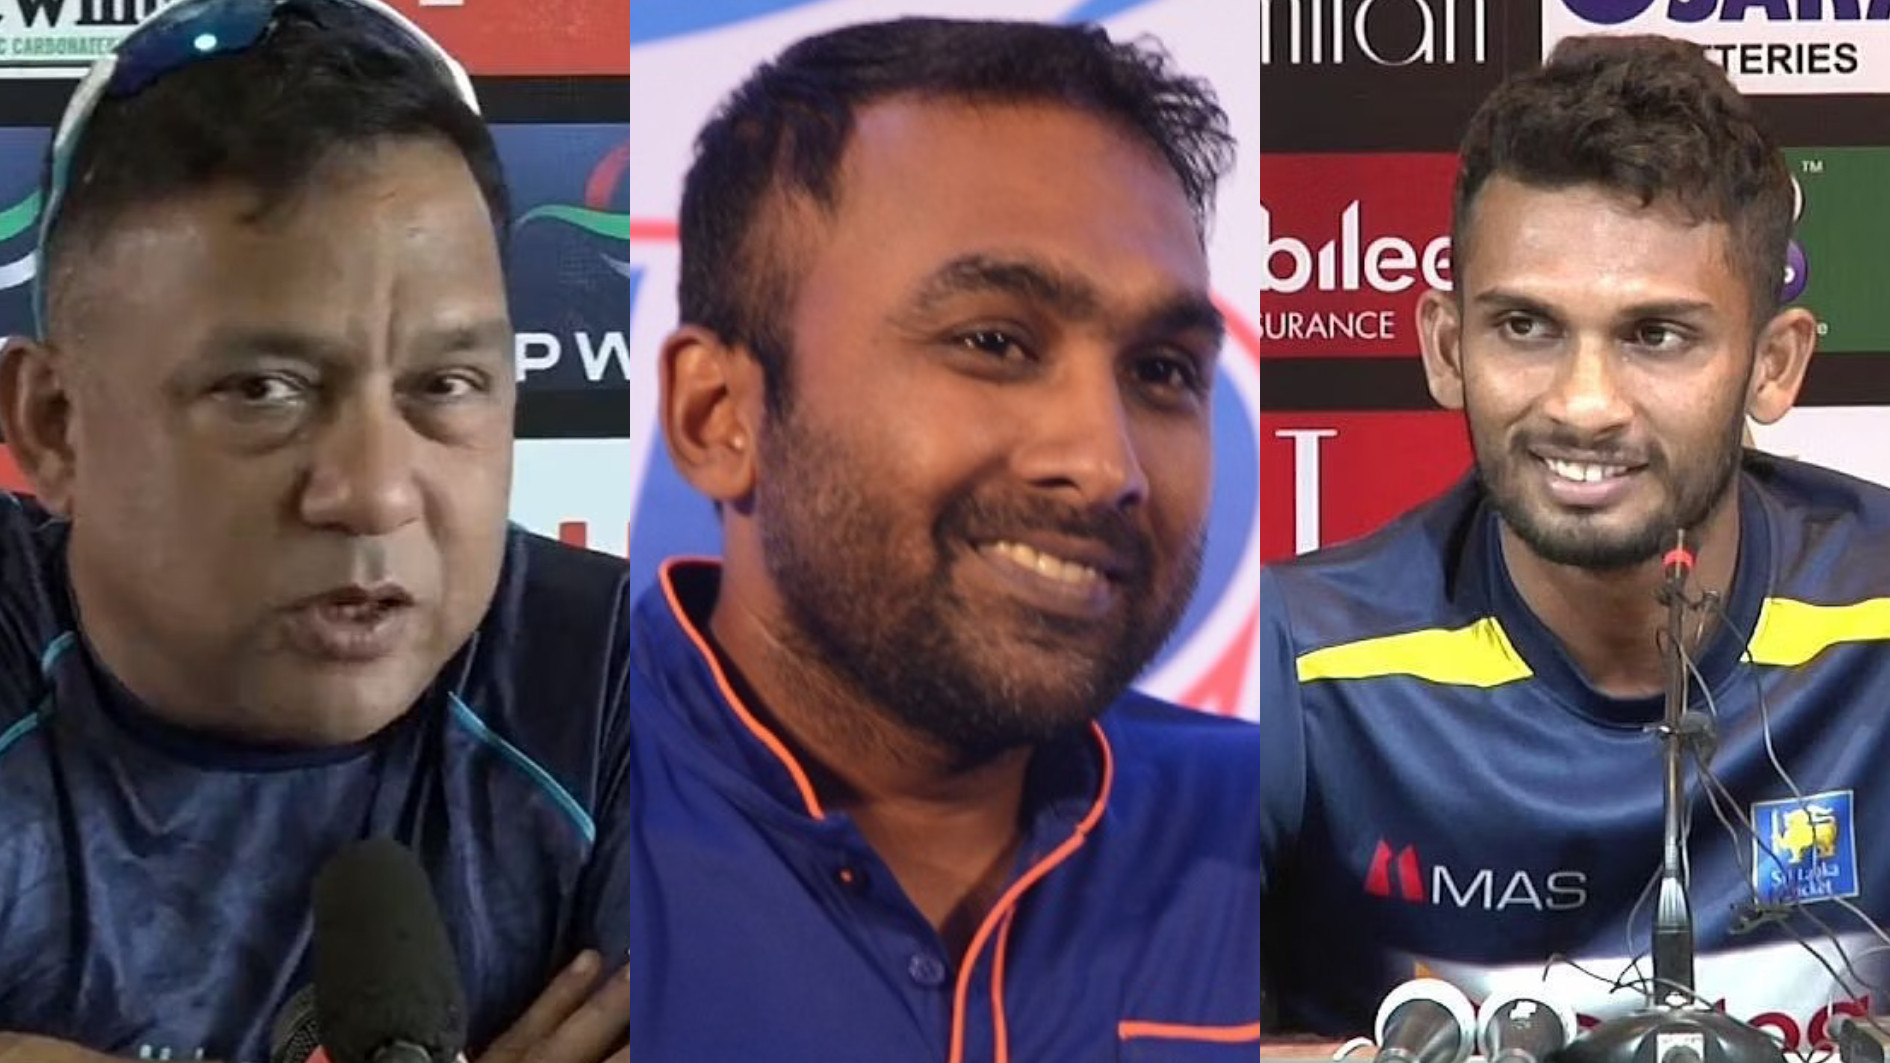 Asia Cup 2022: ‘Time for Sri Lanka to show their class’- Jayawardena’s message ahead of crucial Bangladesh clash